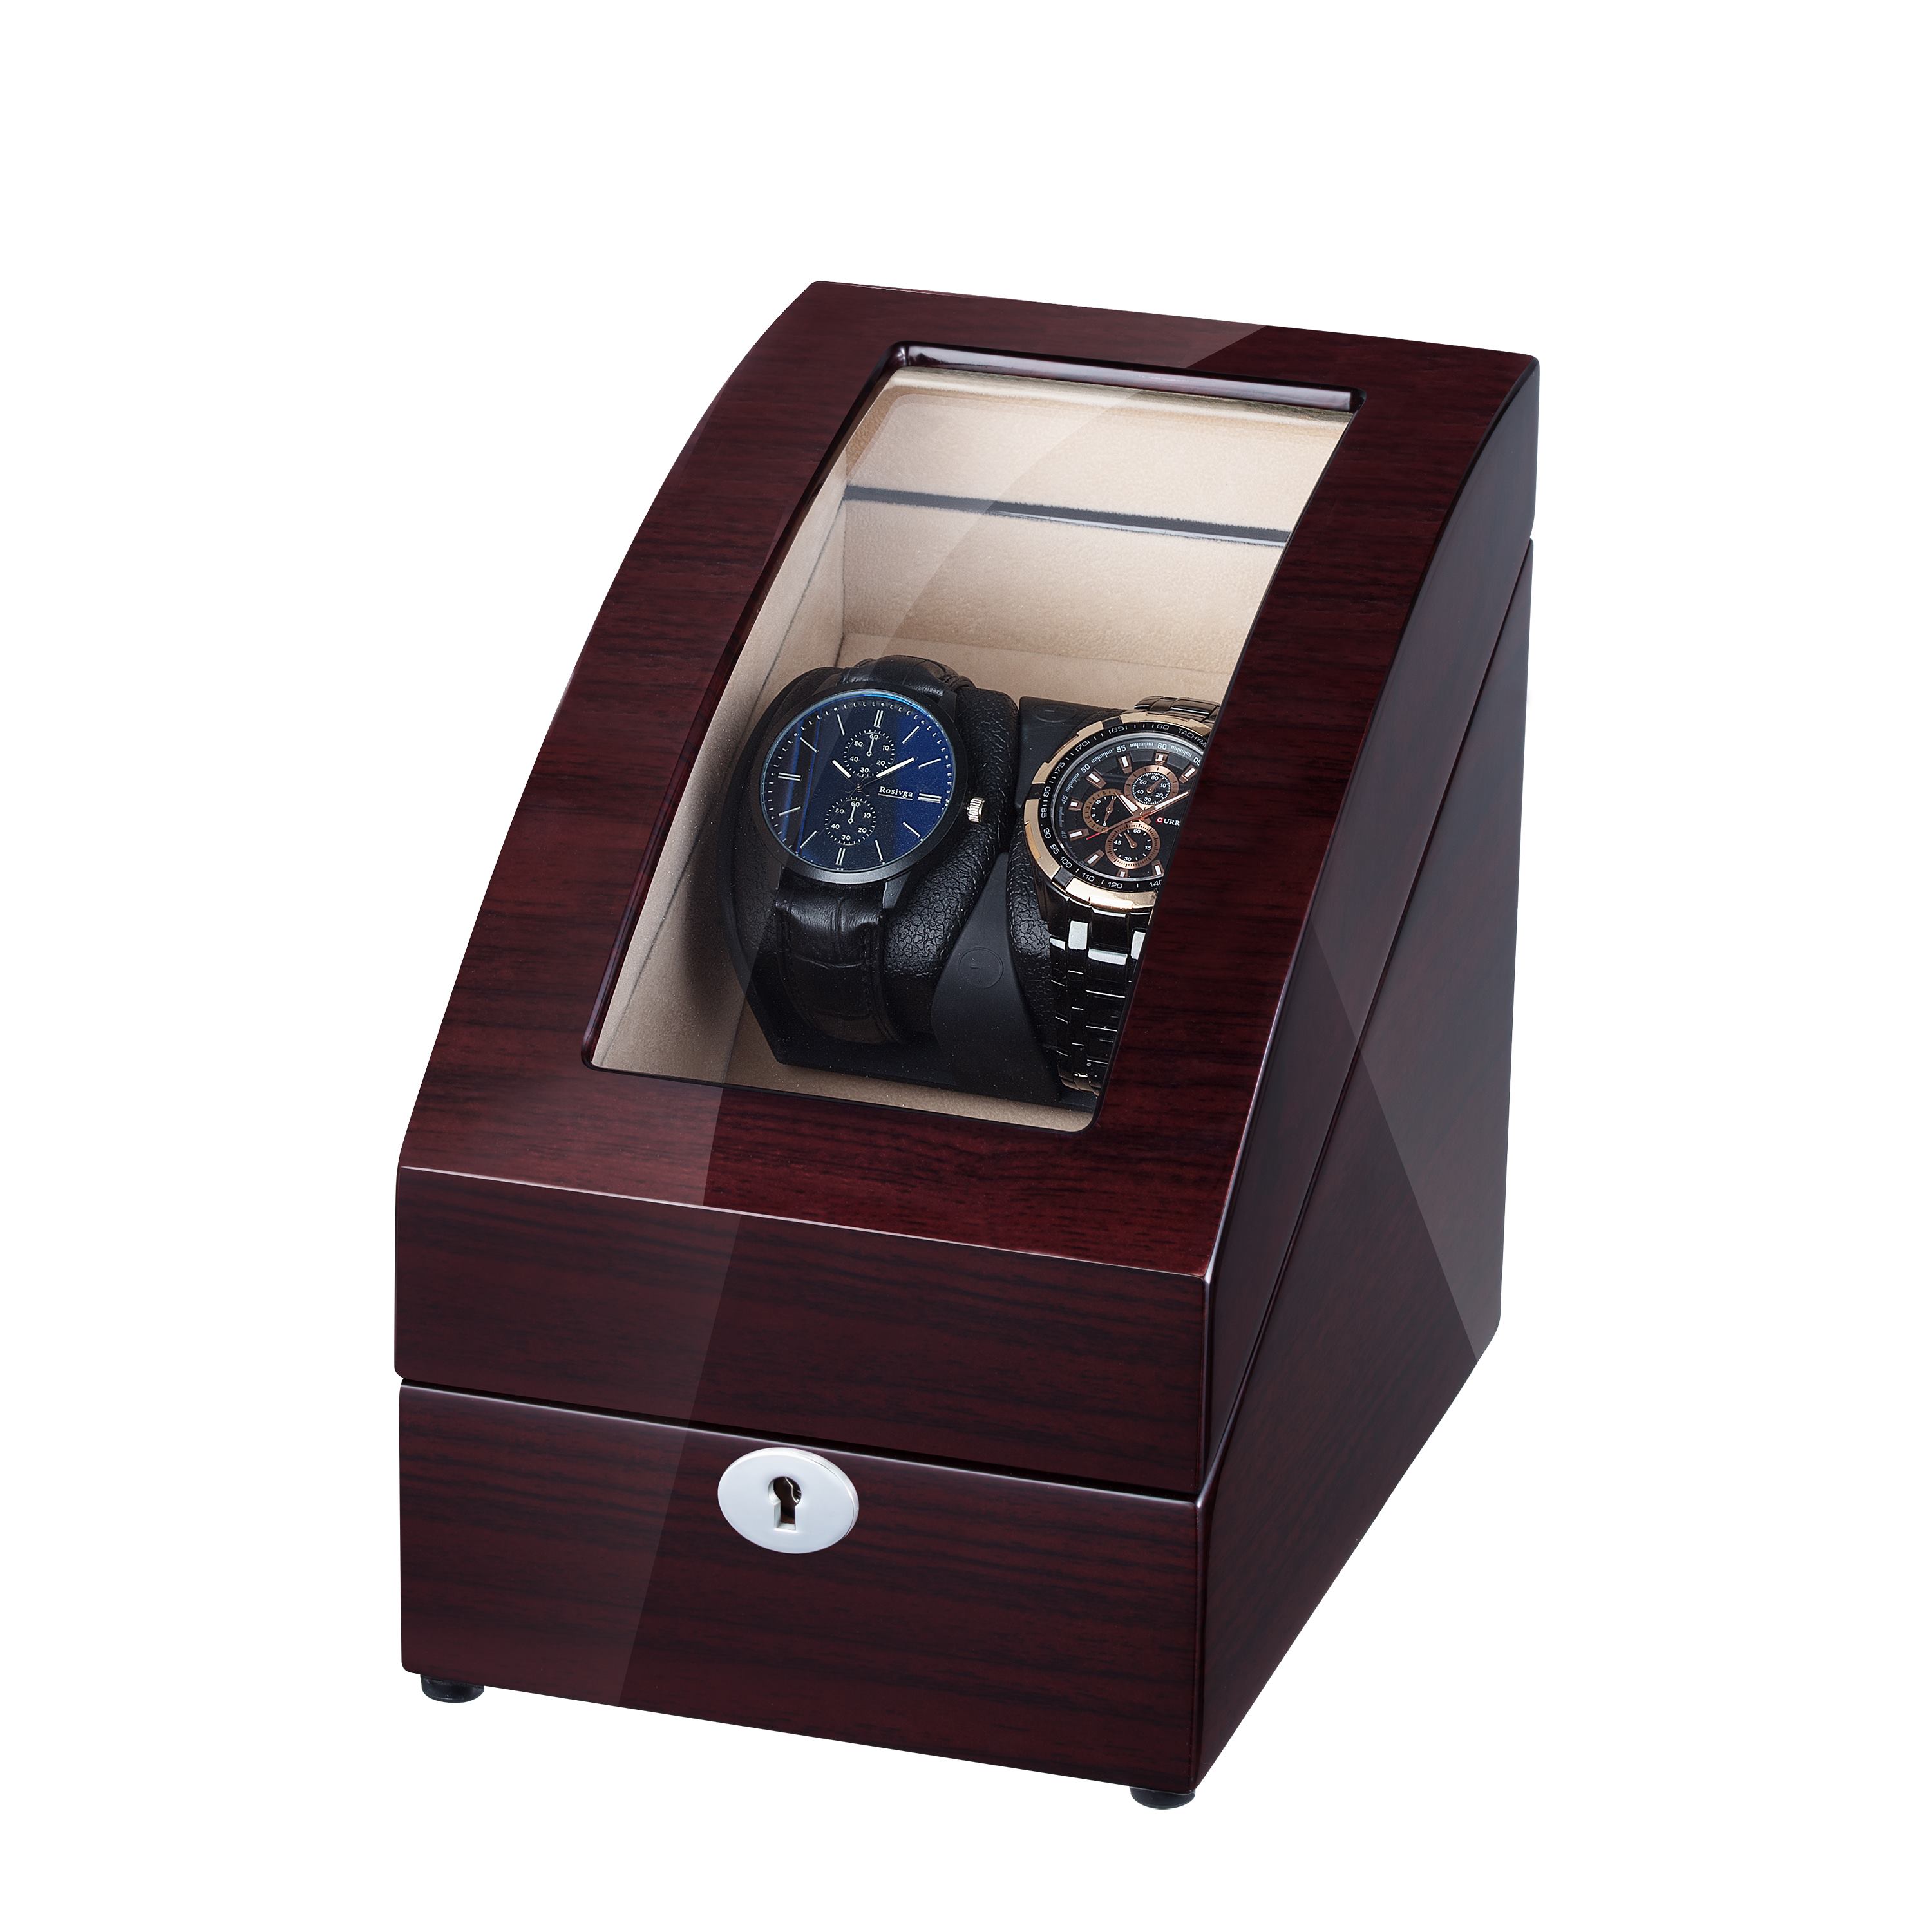 WATCH WINDER FOR 4 WATCHES, WITH STORAGE